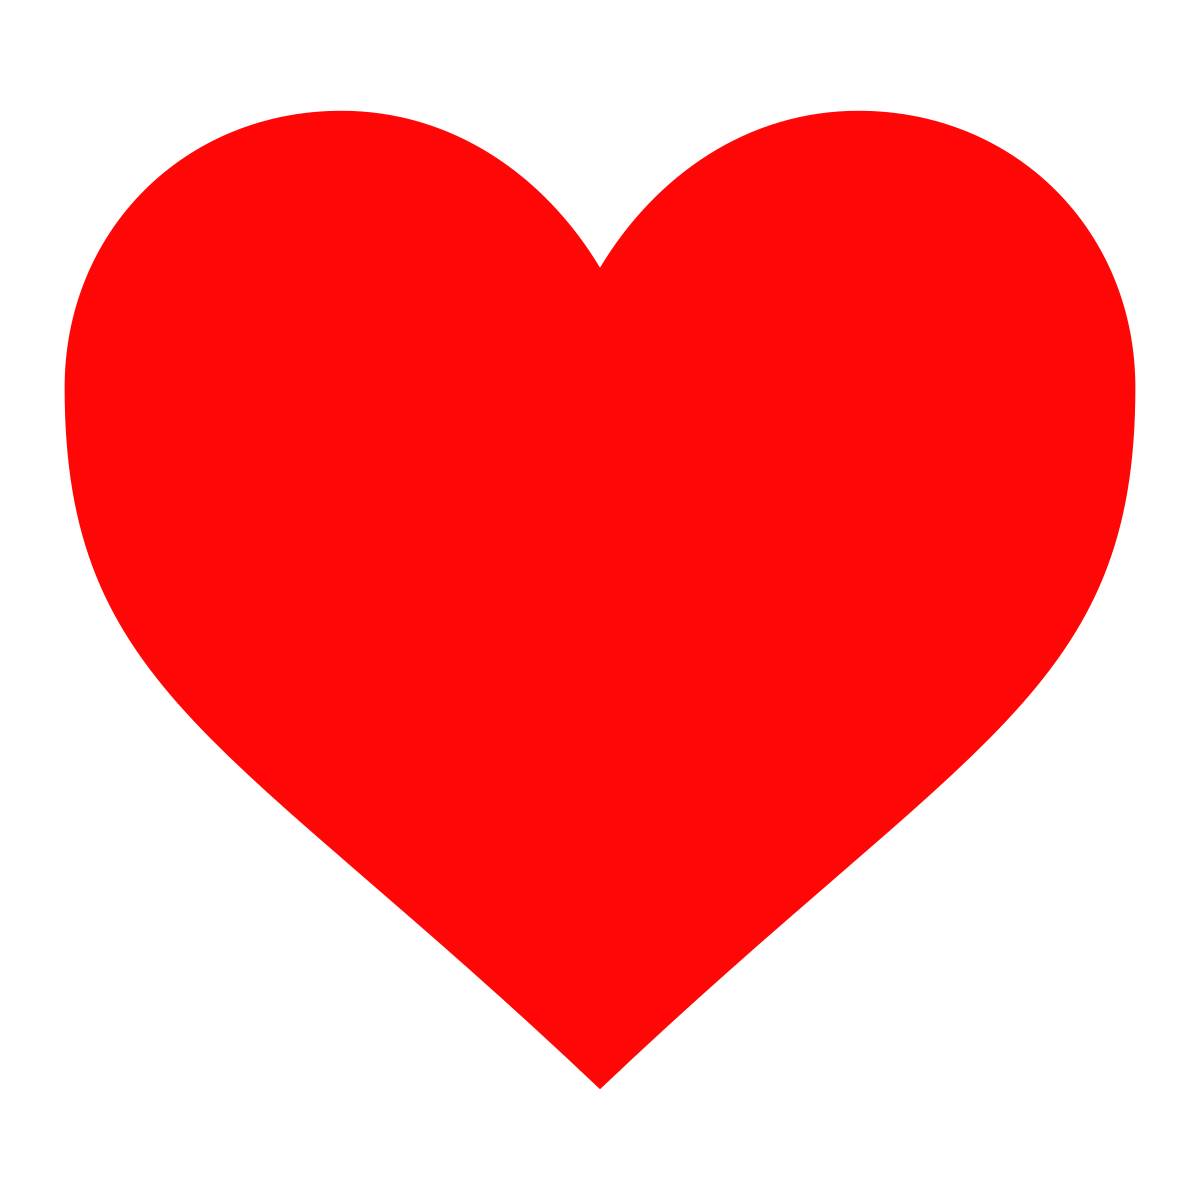 heart icon for saved images